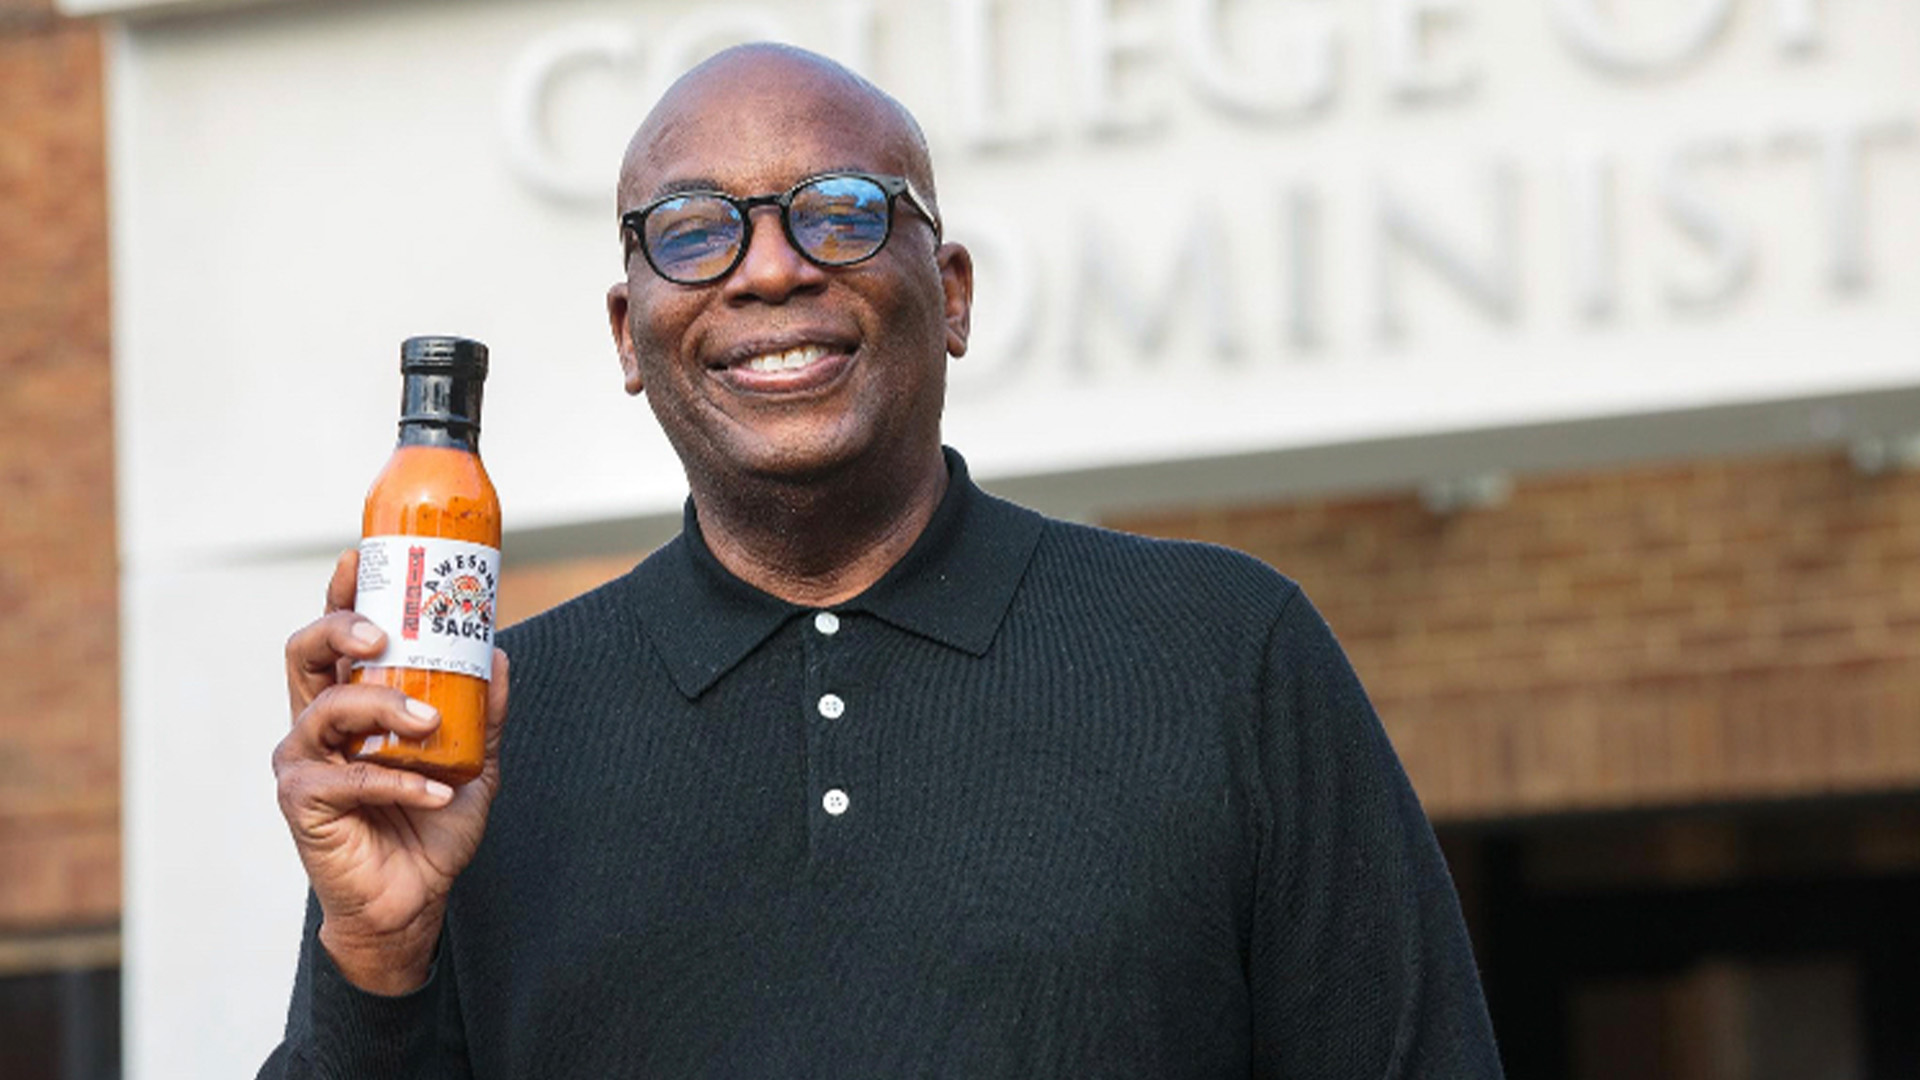 Michael Roberson's Sauce Company Went From Being In One Whole Foods Market To Launching In Over 100